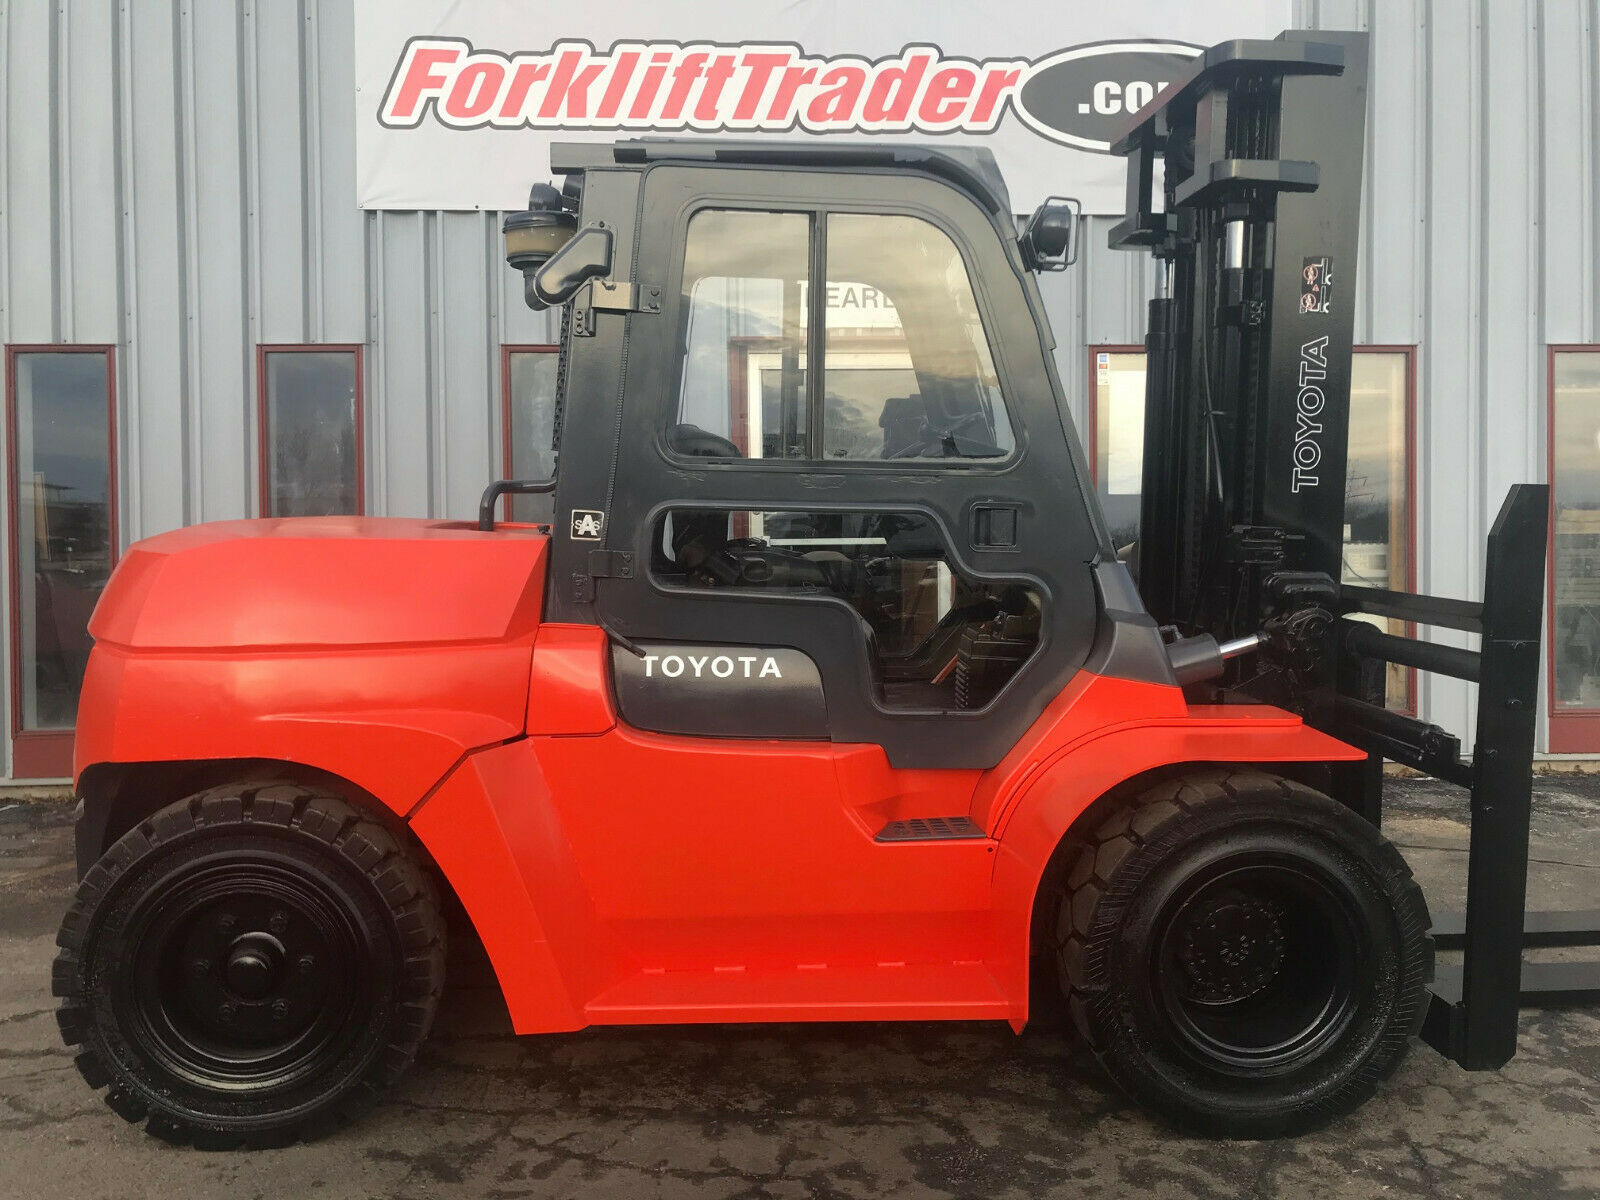 Orange 2012 toyota forklift with dual pneumatic tires for sale